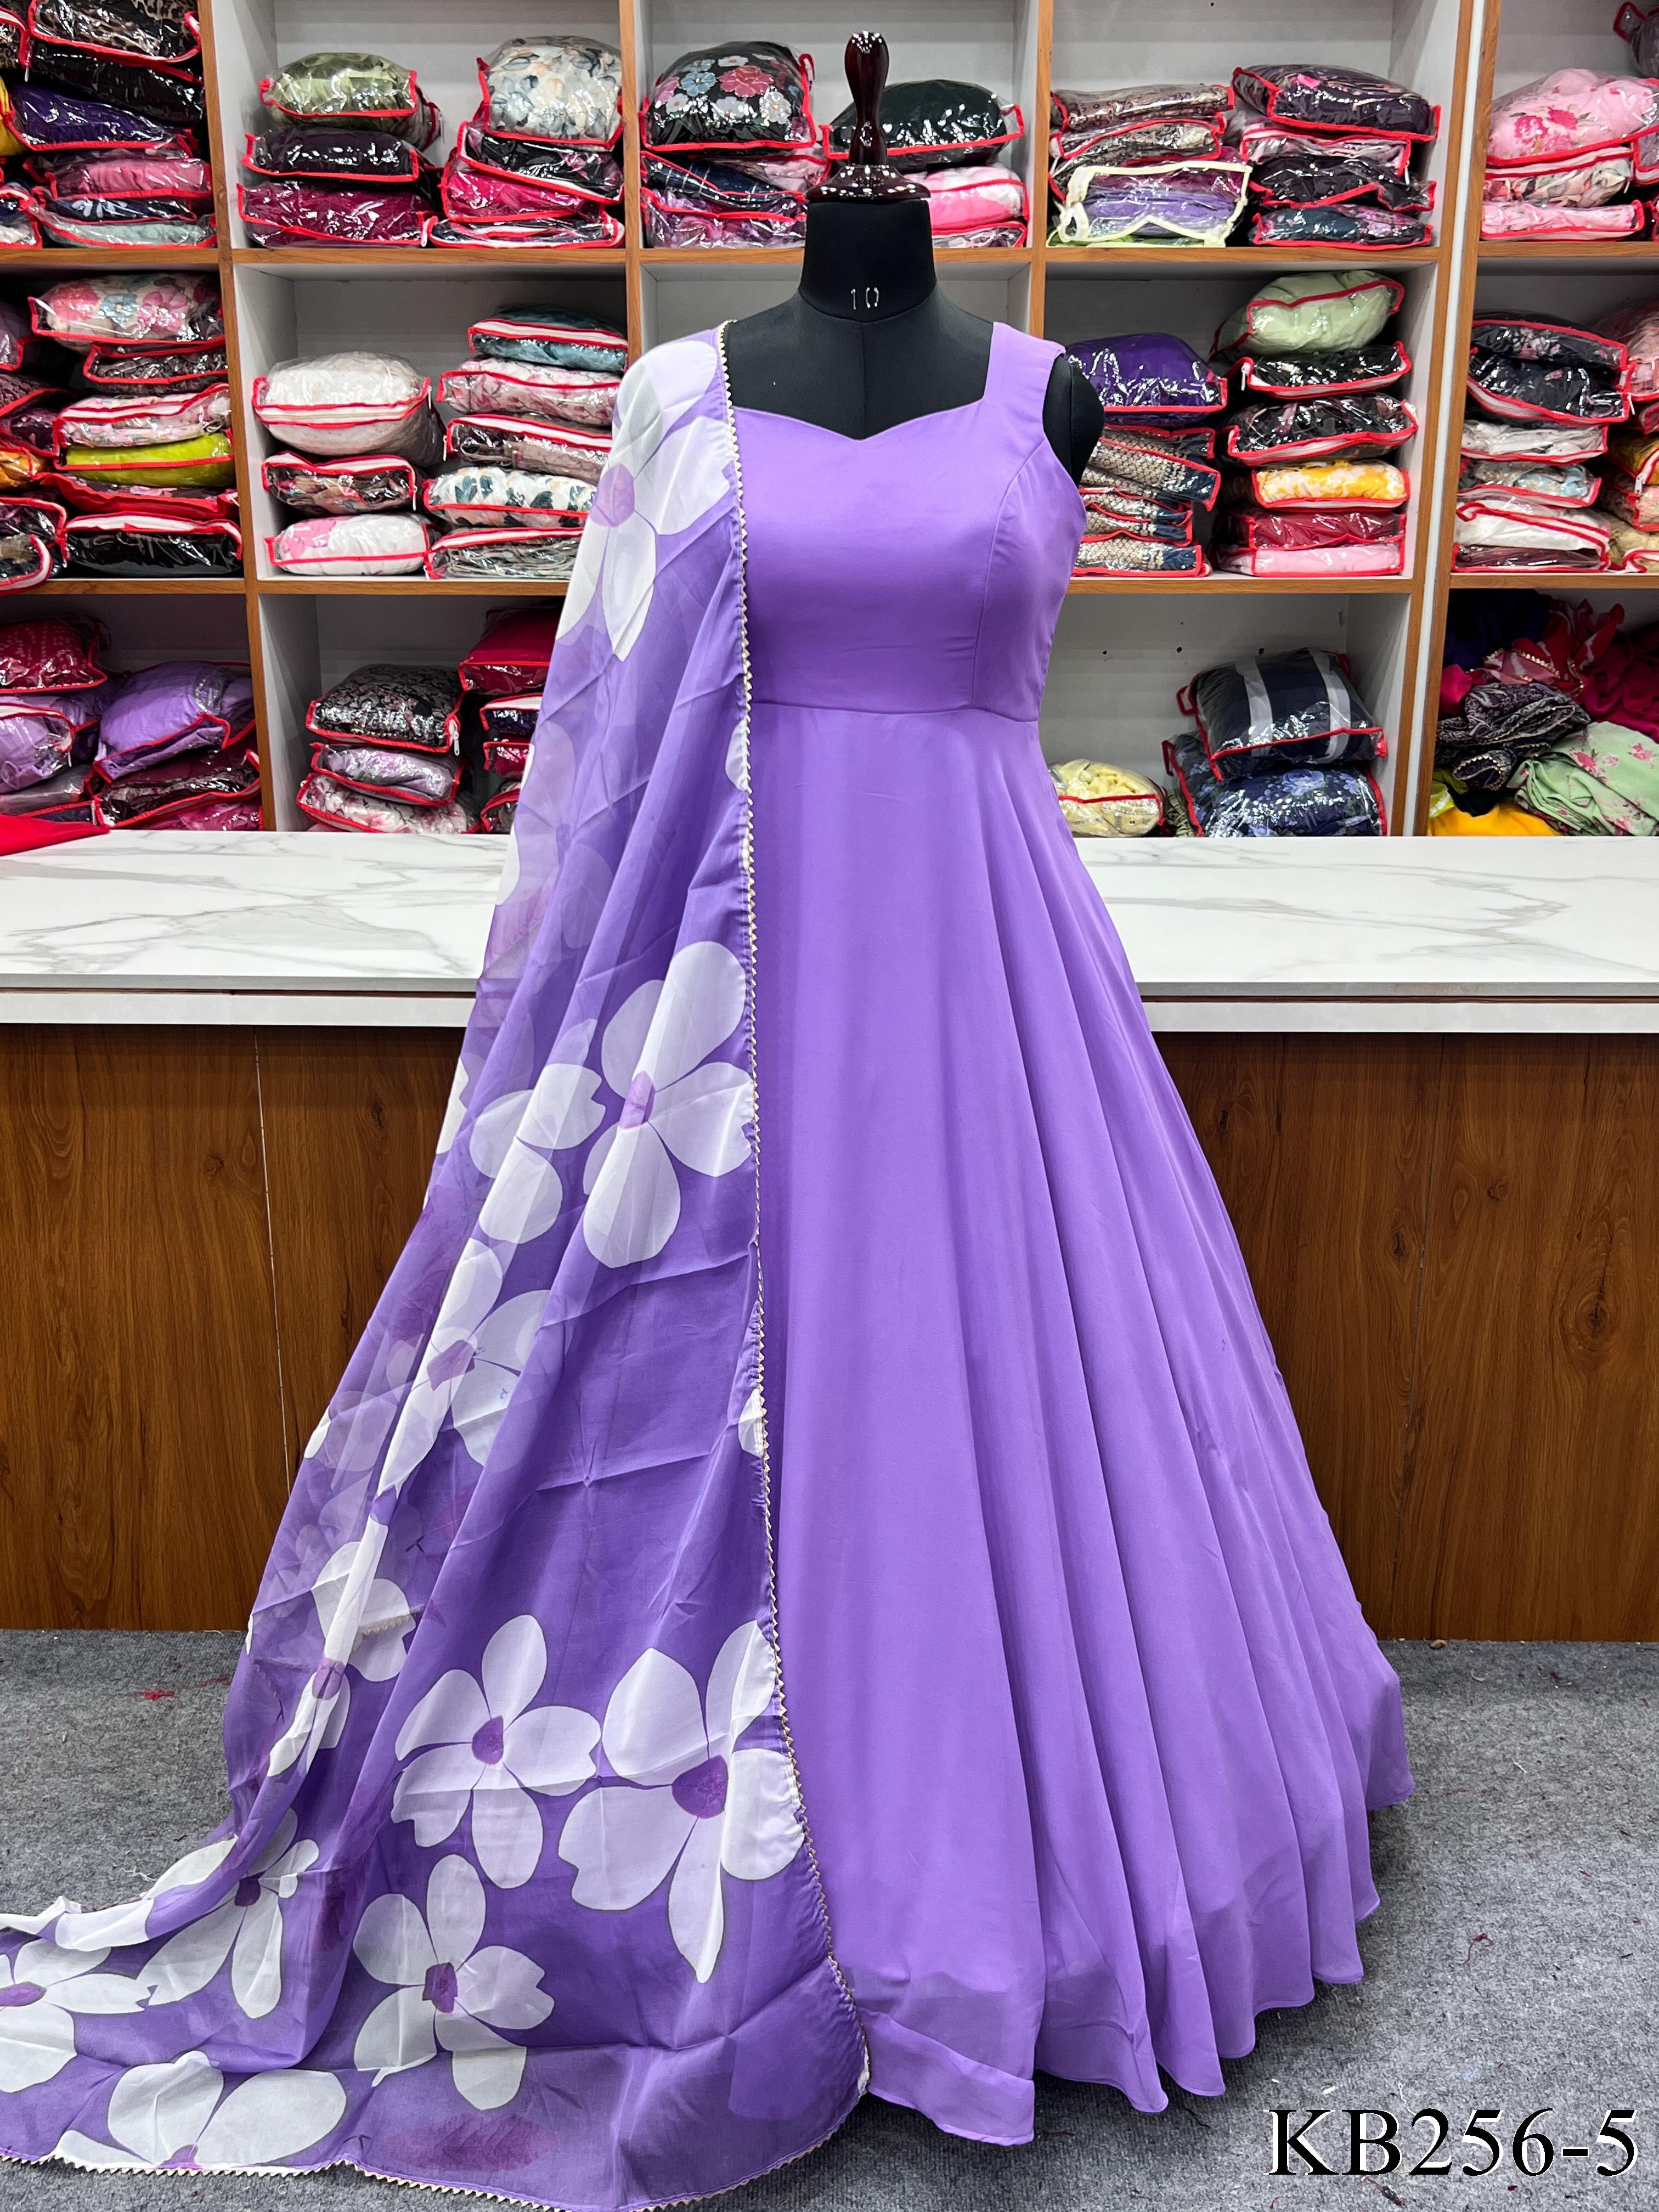 Demanded Georgette Plain Gown With Floral Printed Dupatta